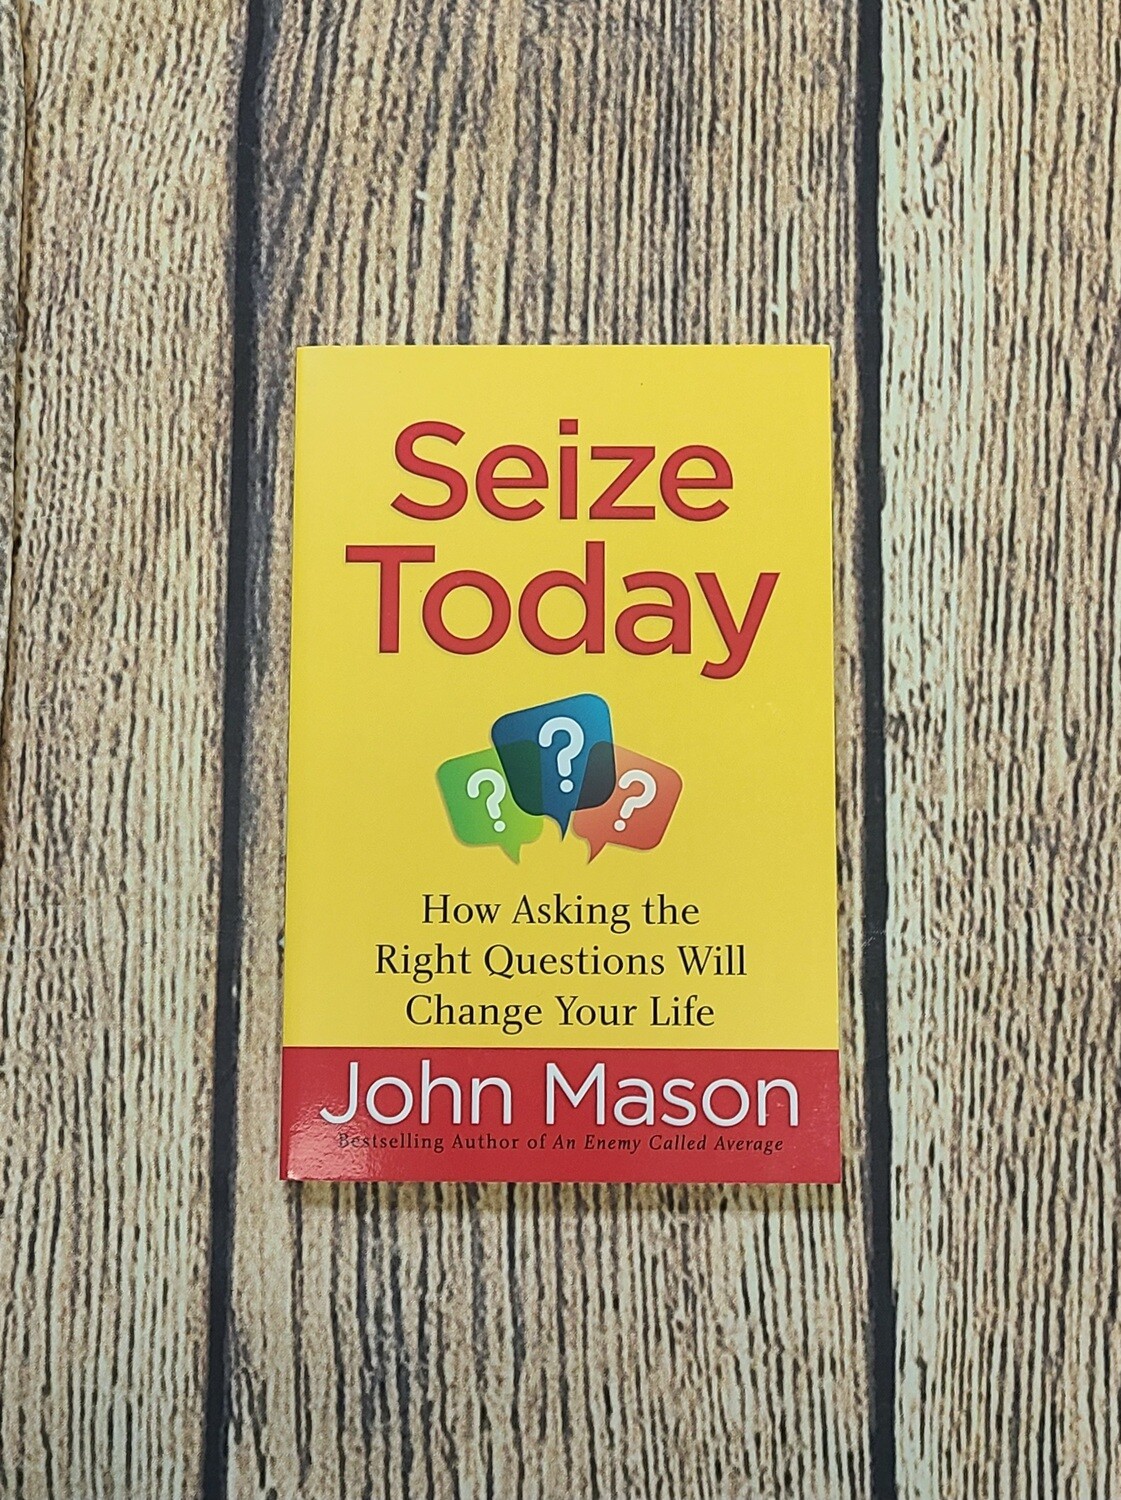 Seize Today: How Asking the Right Questions Will Change Your Life by John Mason